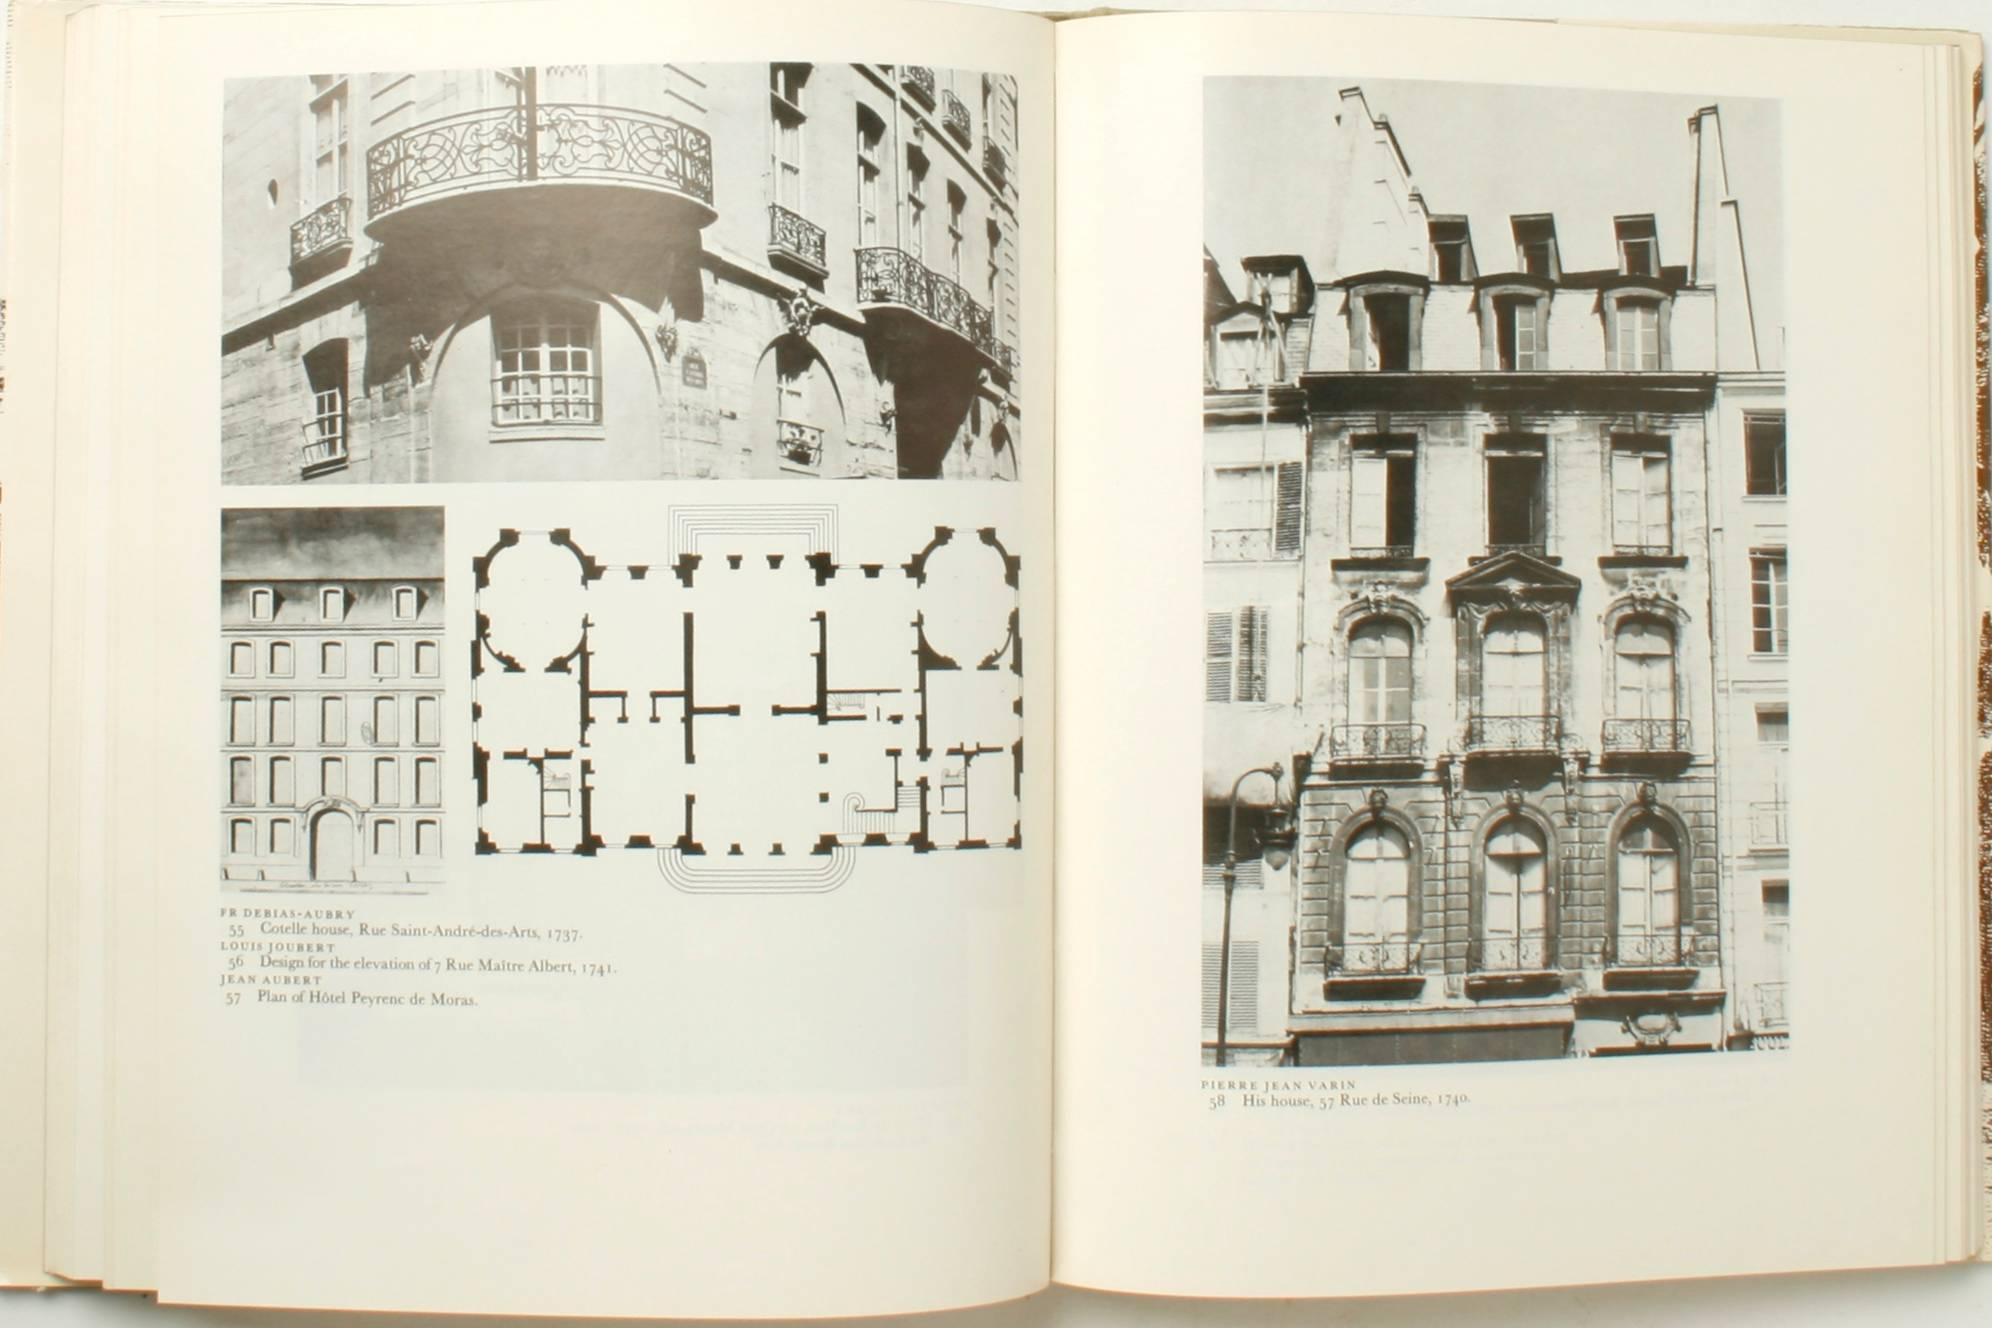 Stately Mansions, 18th century Paris Architecture by Michel Gallet. NY: Praeger Publishers,1972. First Edition hardcover with dust jacket. 196 pp. A history of the mansion in 18th century Paris starting with an overview of 18th century Paris at a